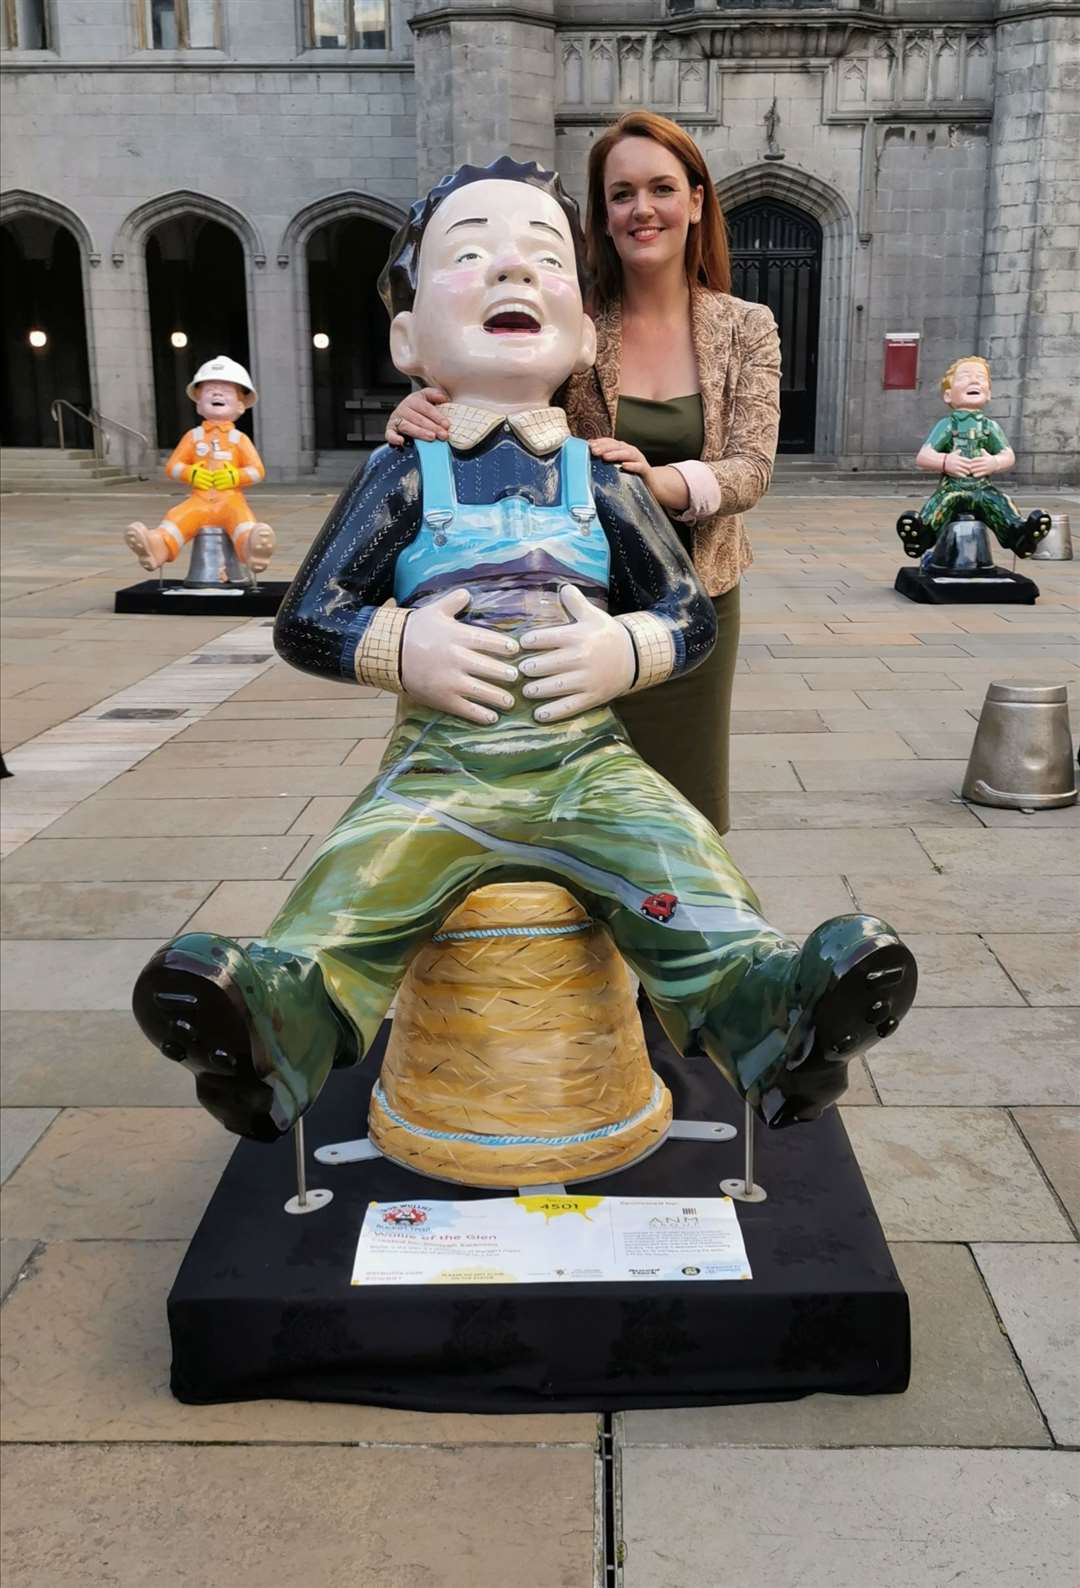 Shelagh Swanson is pictured here with her sculpture Wullie of the Glen which raised £7000 at the charity auction.